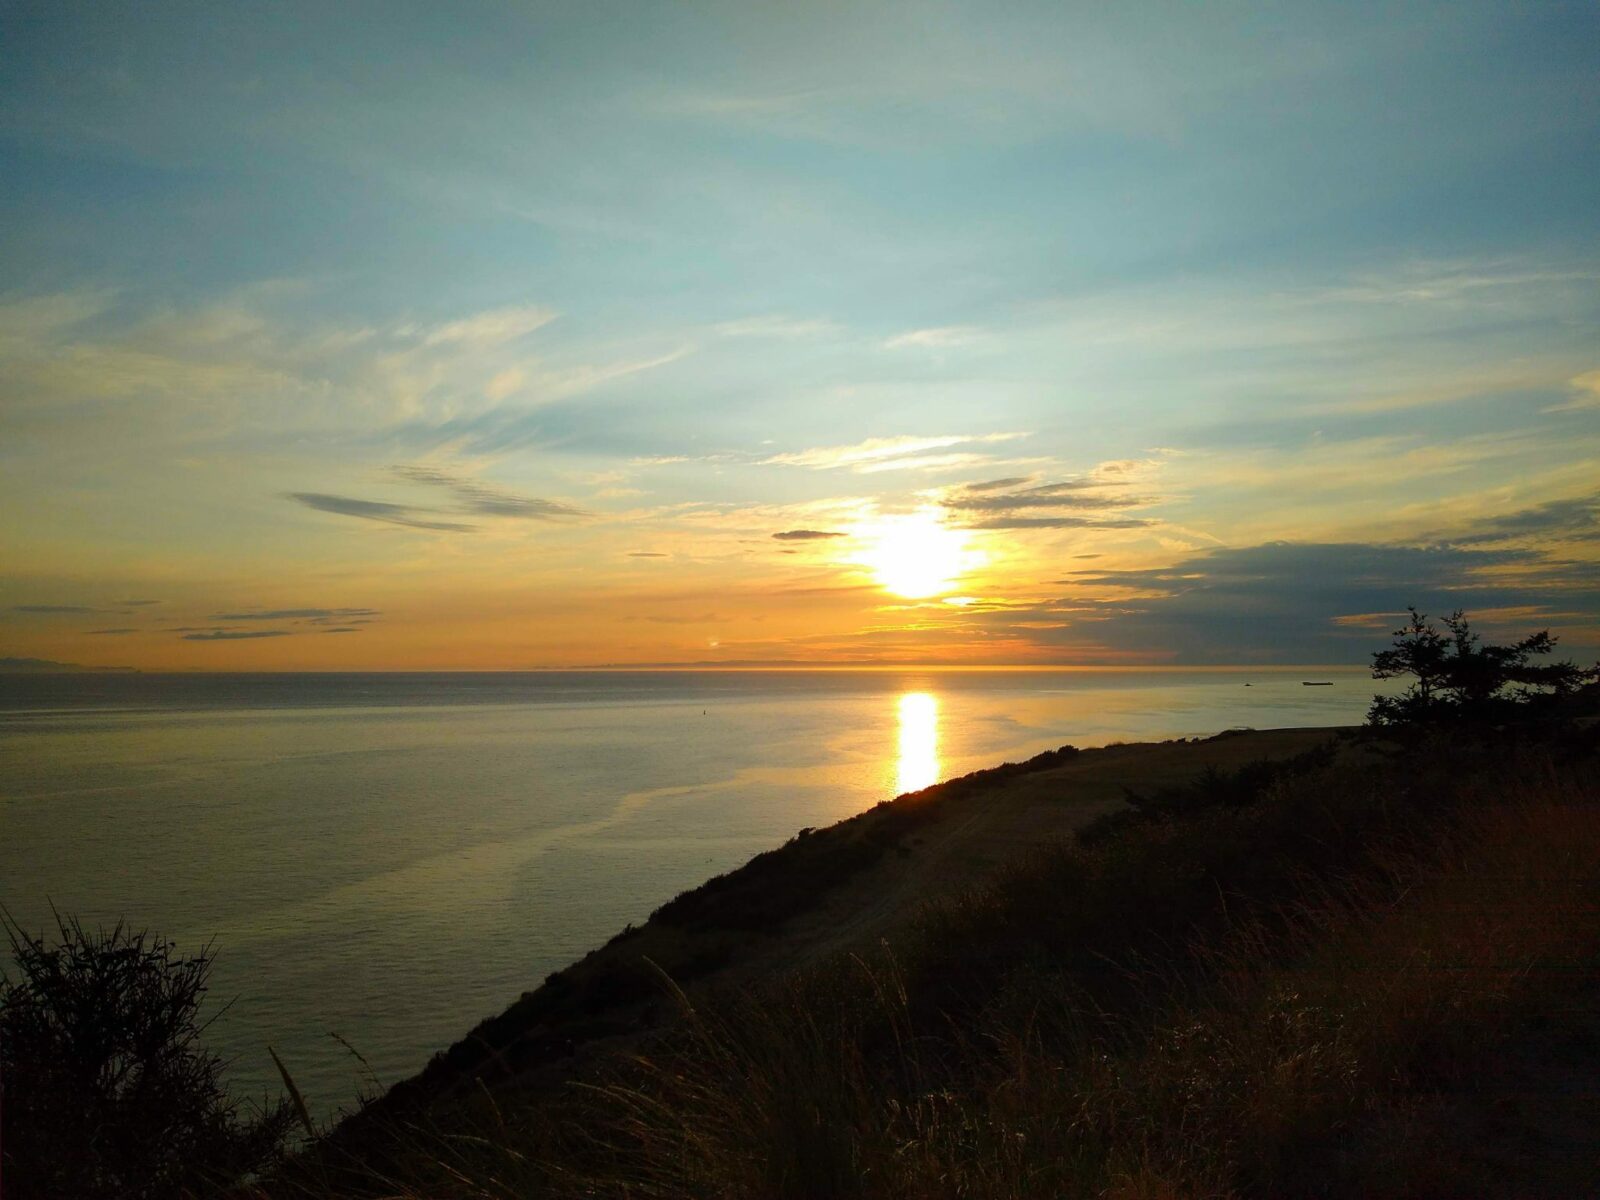 Sunset from a whidbey island hike at Fort Ebey State Park. There is a bluff in the foreground in shadow with a couple of trees. Beyond is calm water going as far as you can see. The sun is just setting behind a few clouds